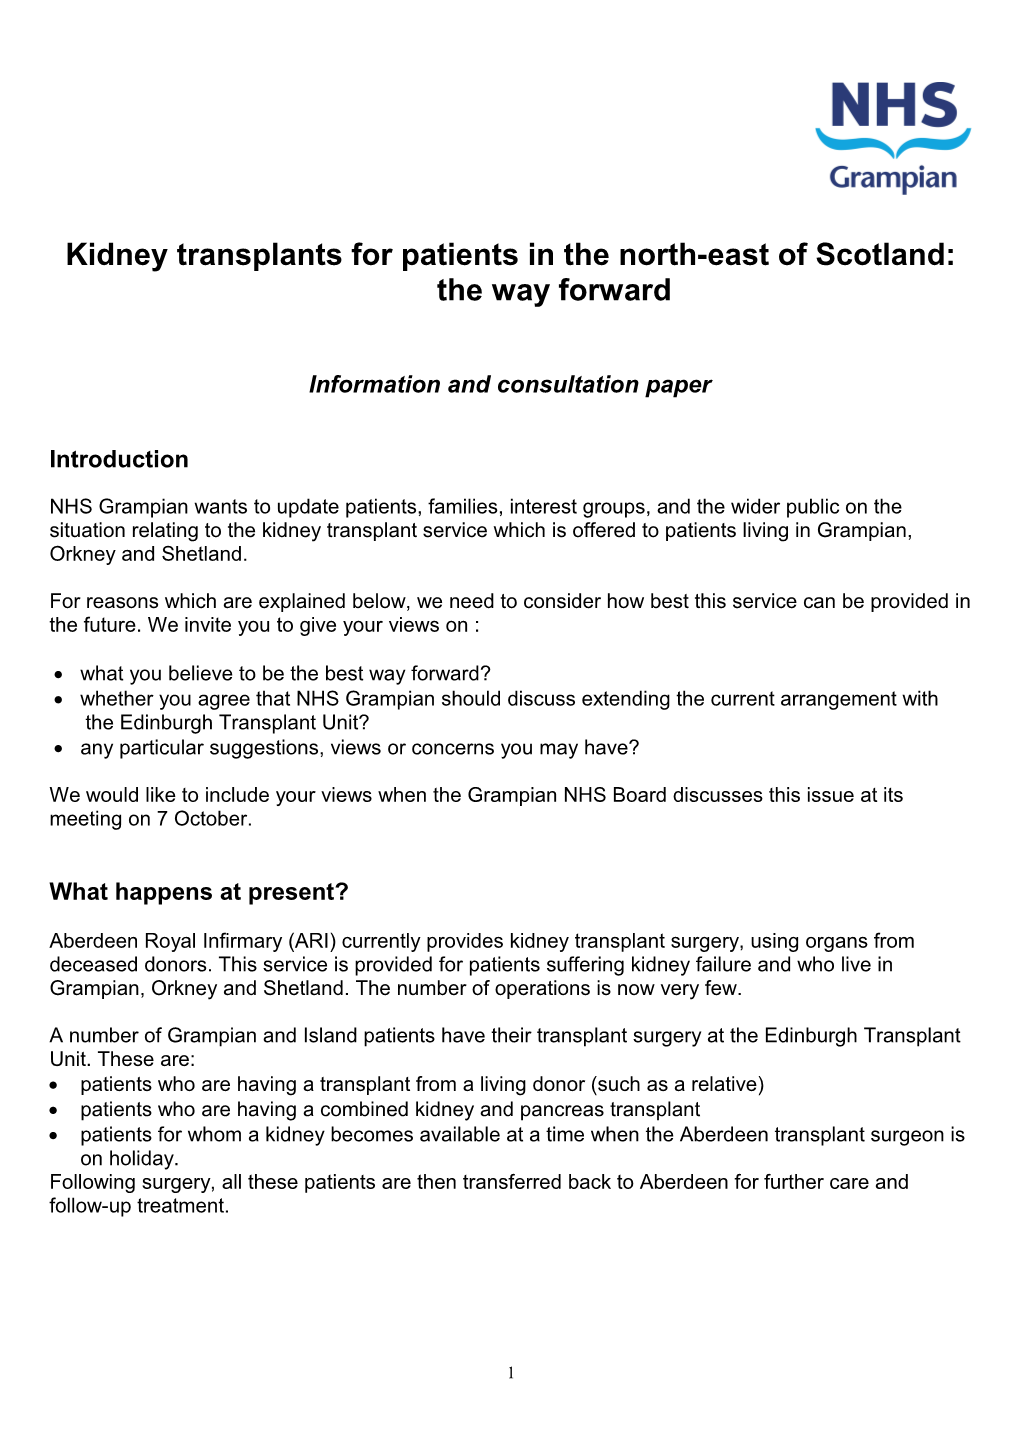 Kidney Transplants for Patients in the North-East of Scotland: the Way Forward